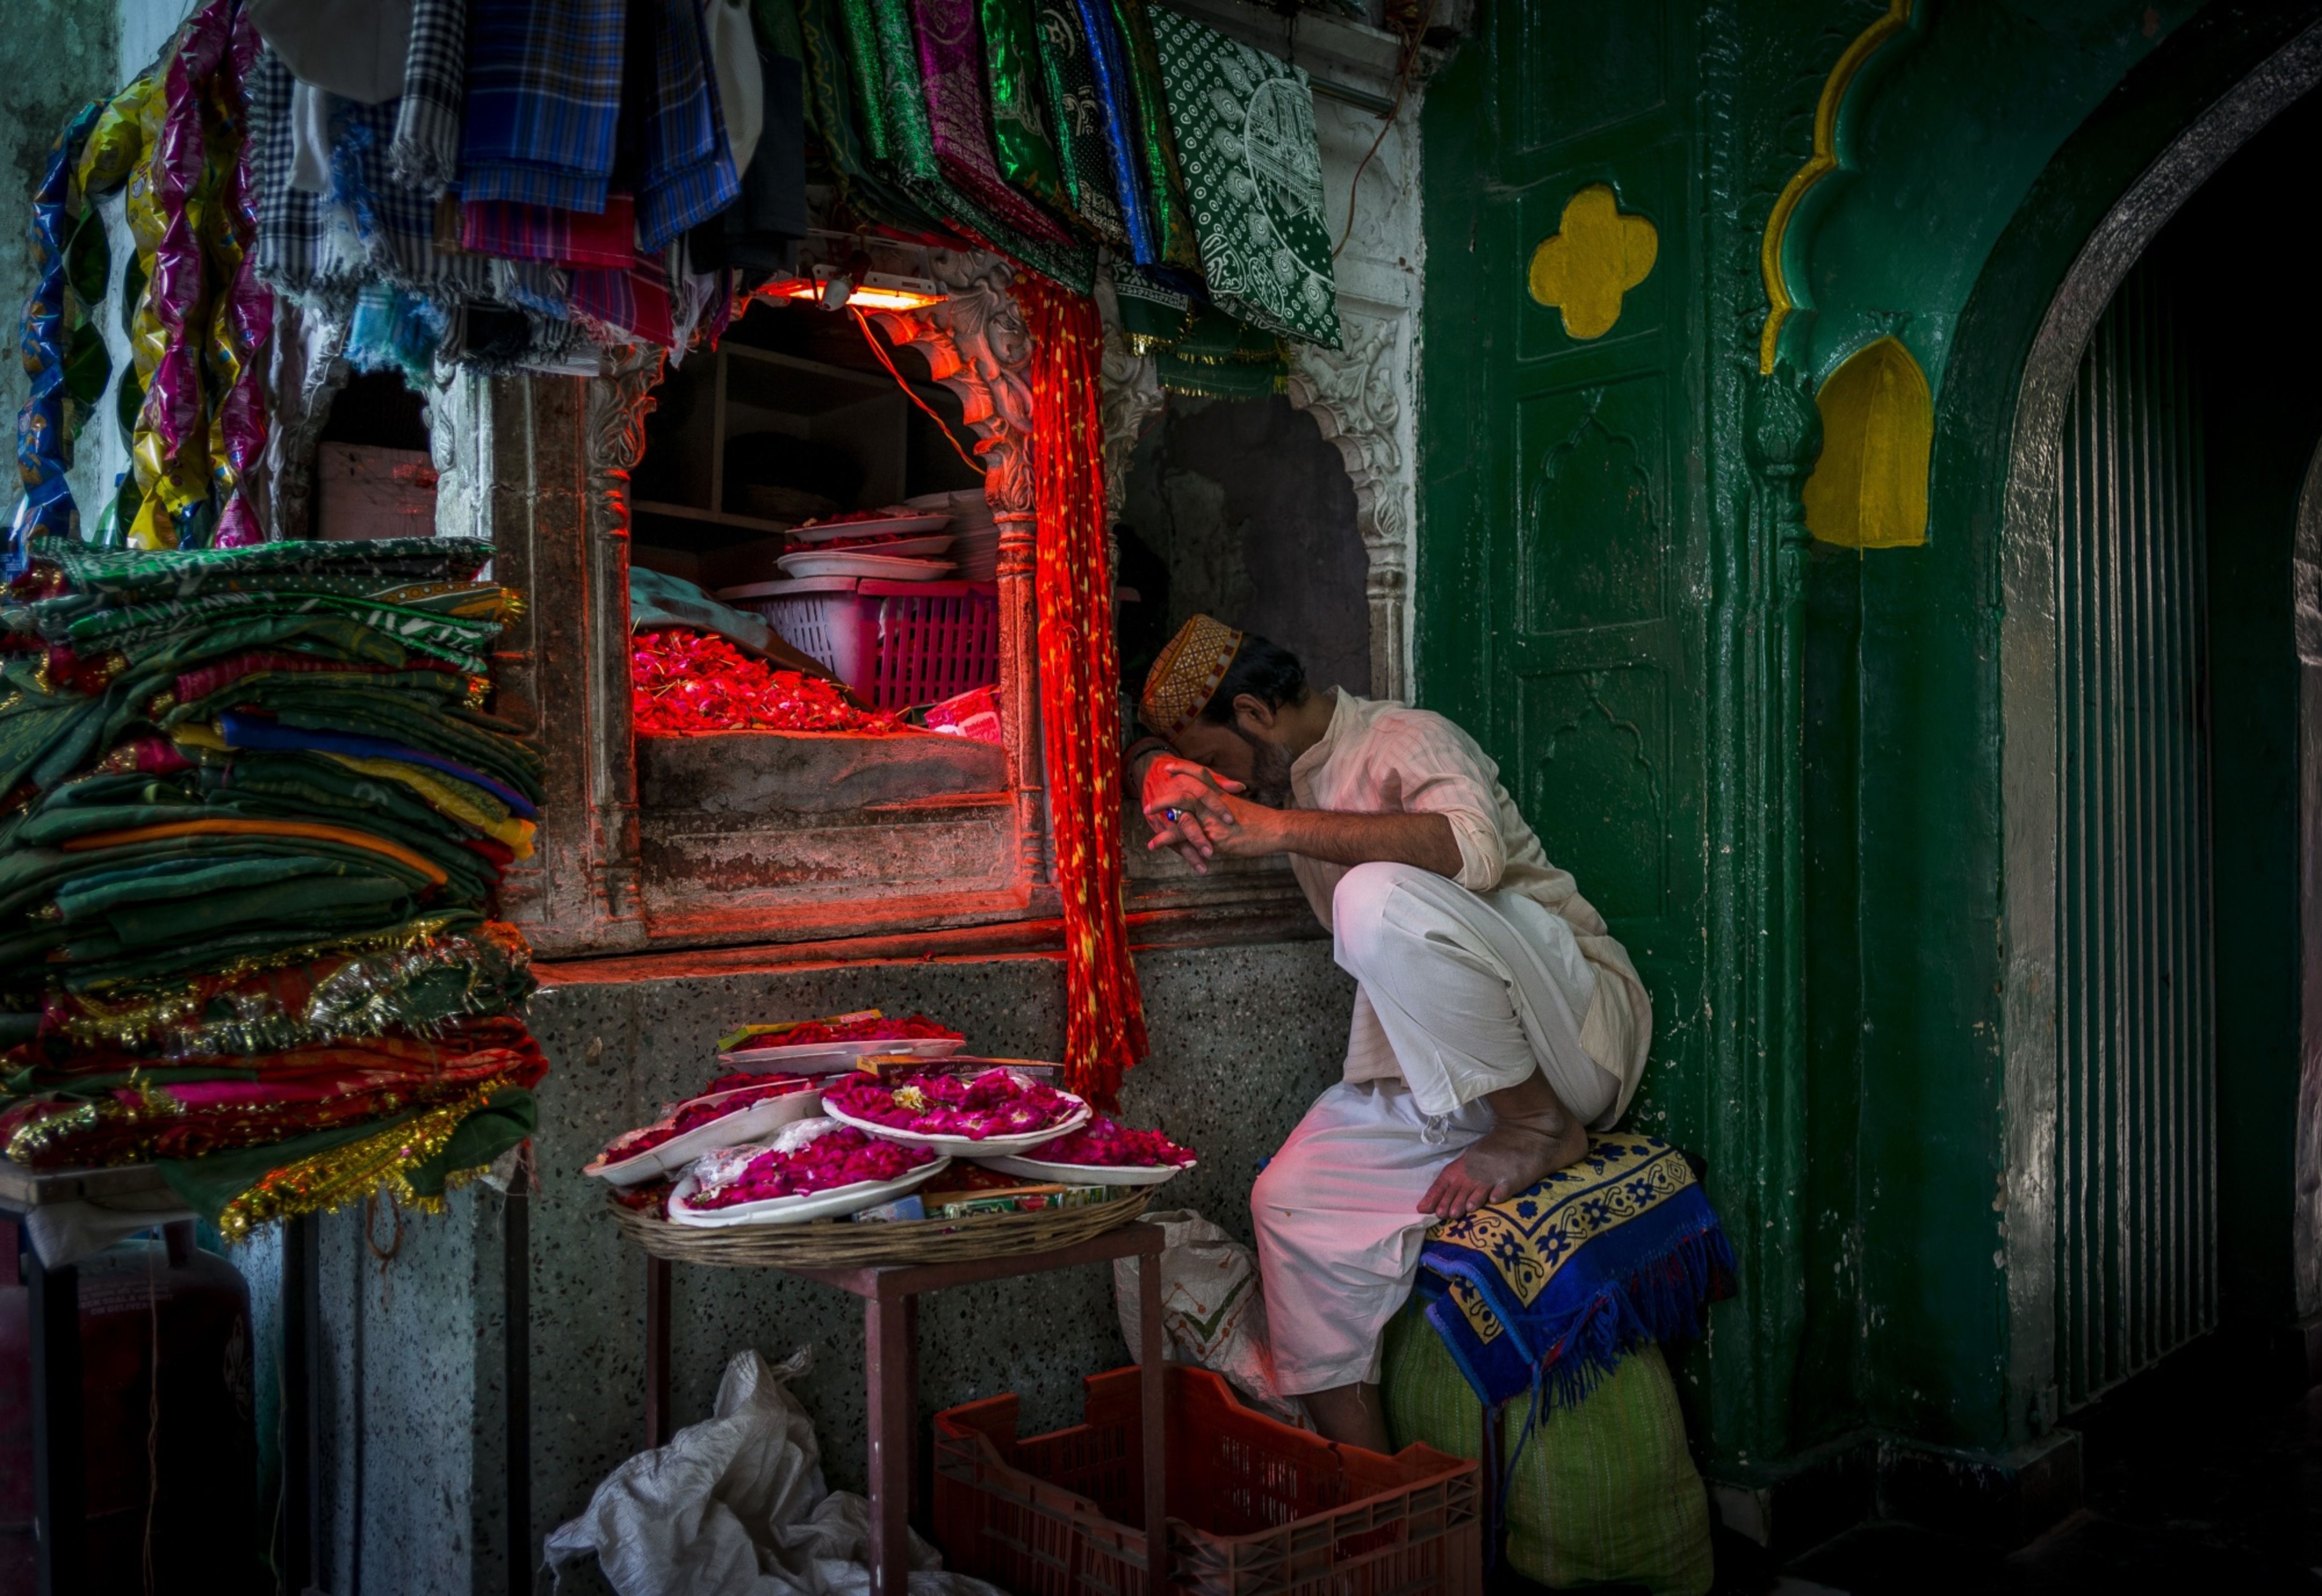 A florist naps on a hot summer afternoon in New Delhi on April 30, 2022. (Anindito Mukherjee/Bloomberg)